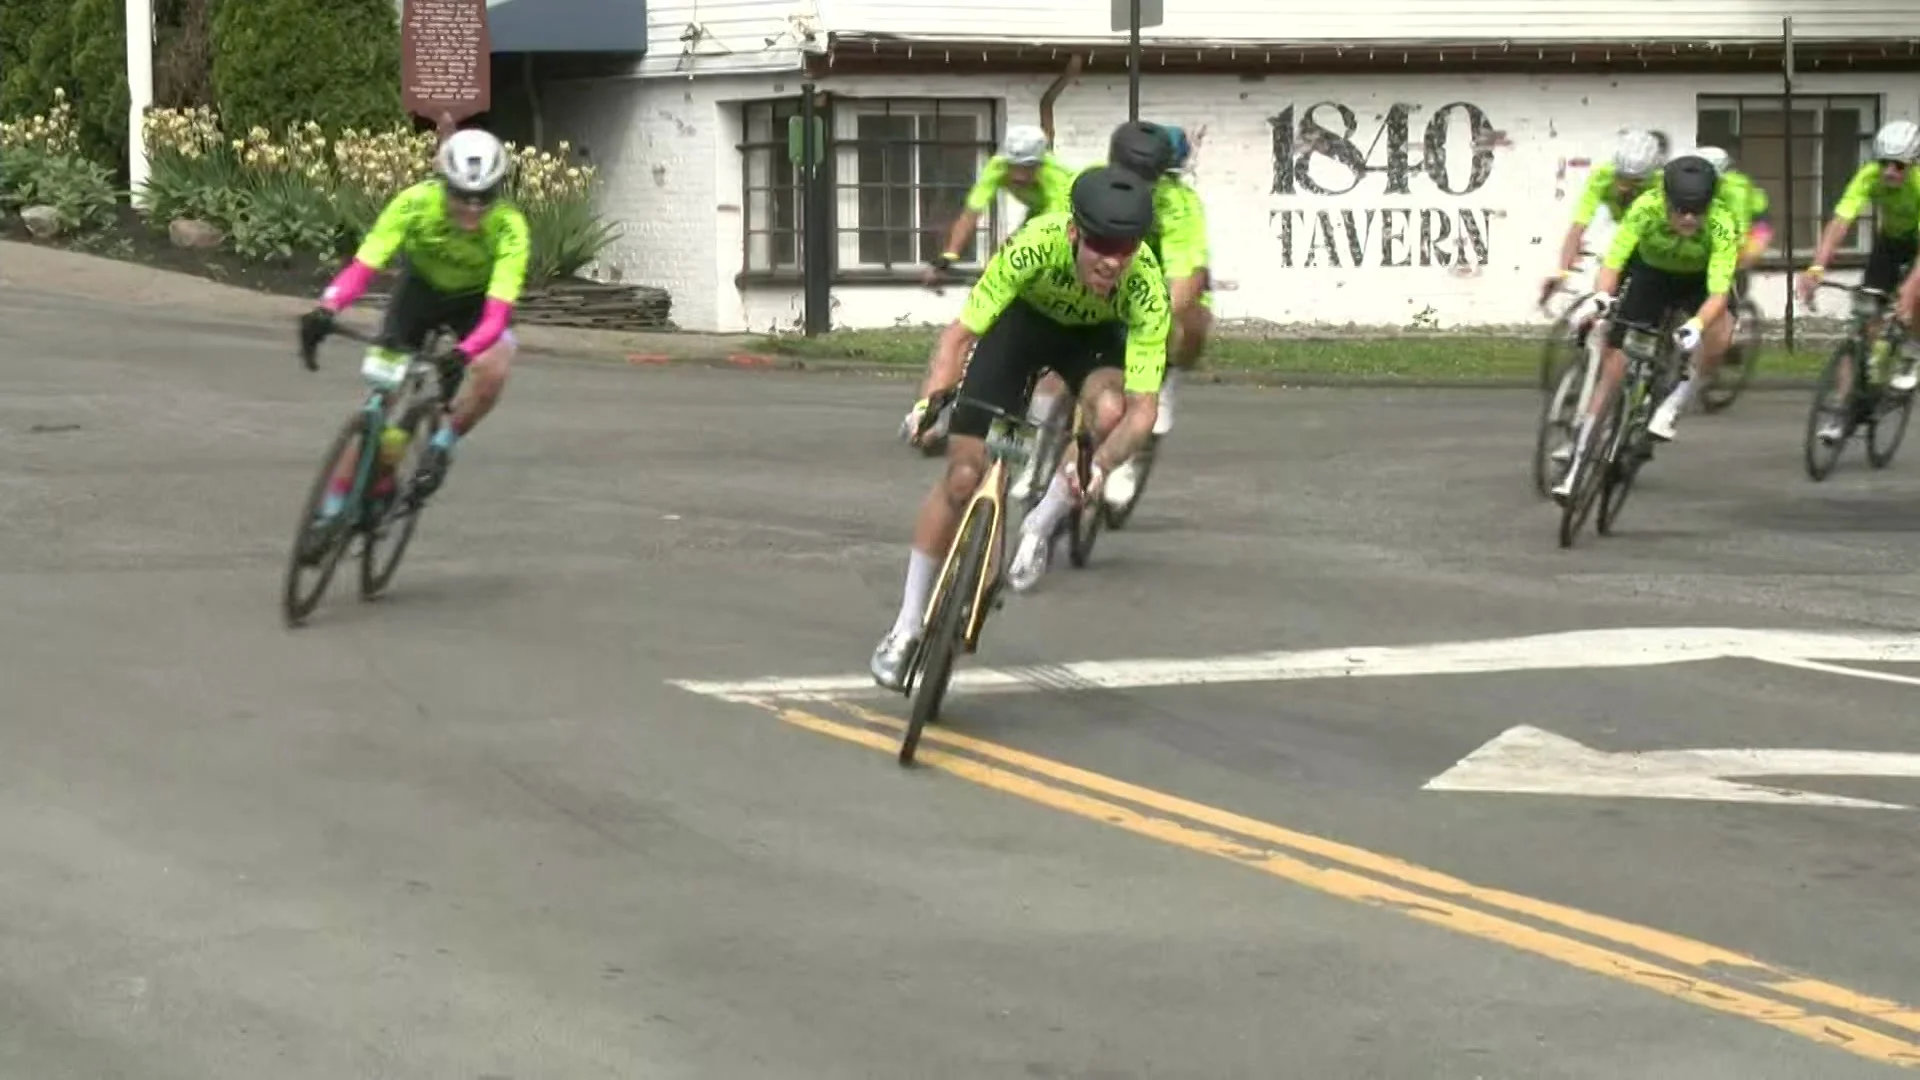 World Cycling Championship Race Brings Traffic, Excitement to Rockland County